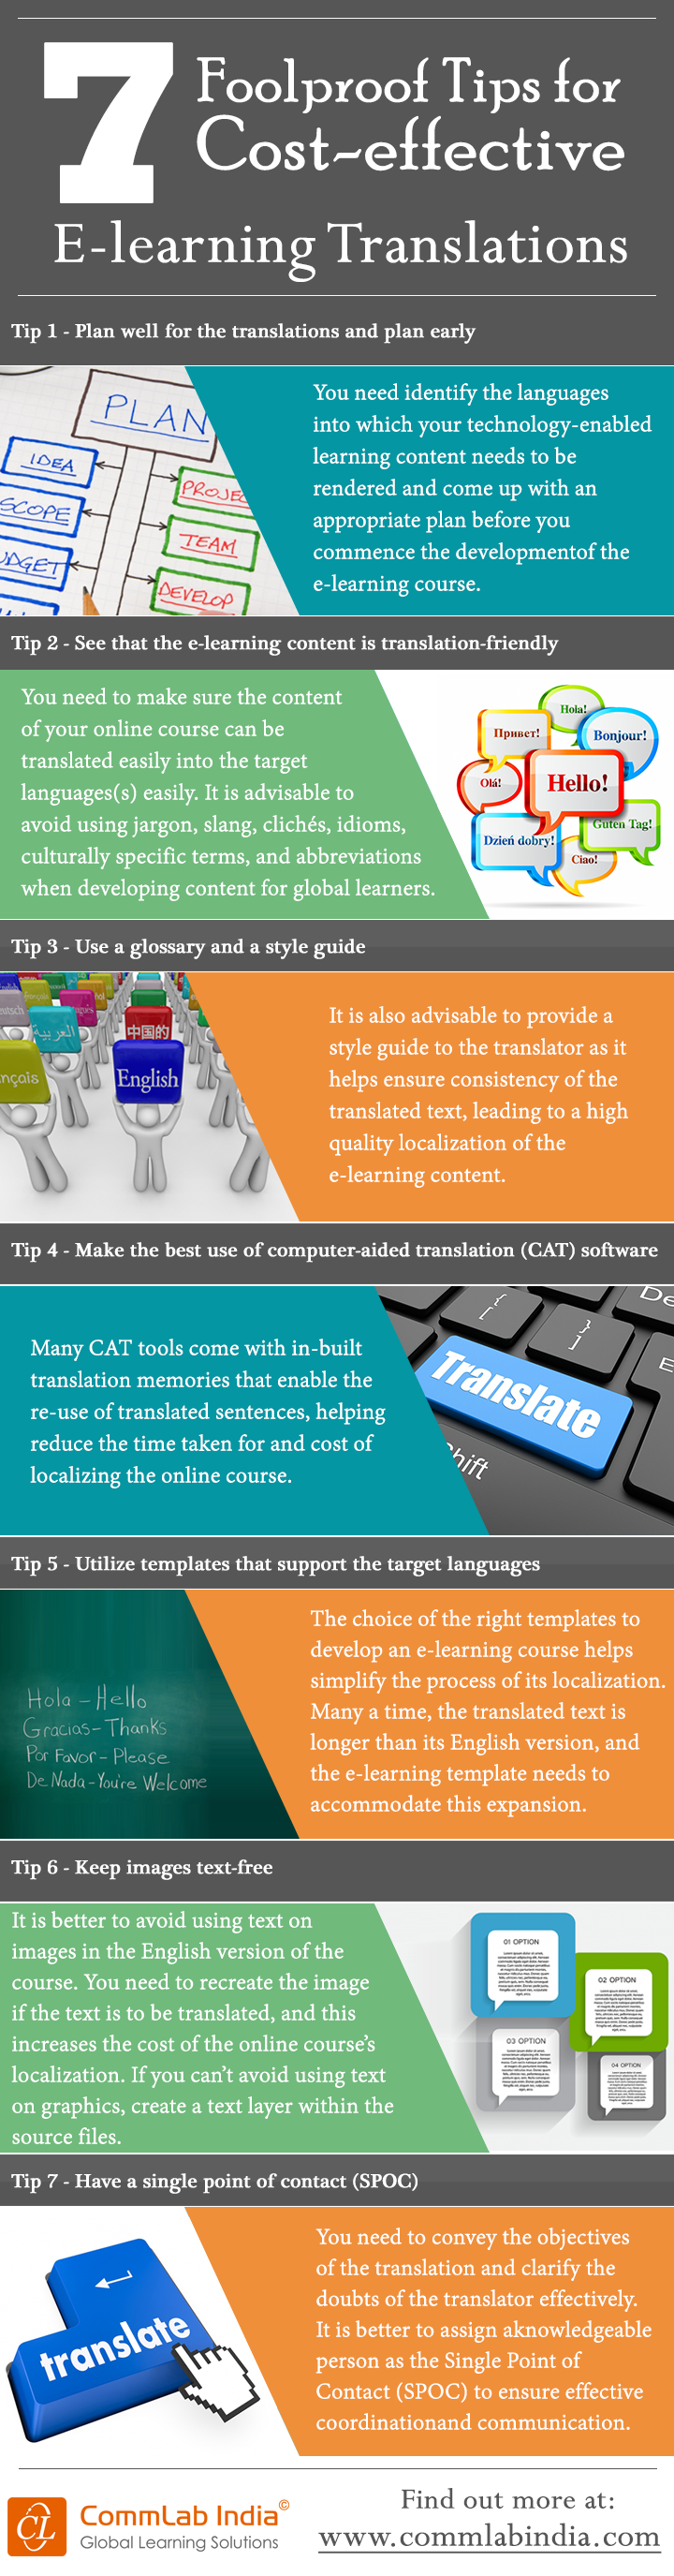 7 Foolproof Tips for Cost-effective E-learning Translations [Infographic]